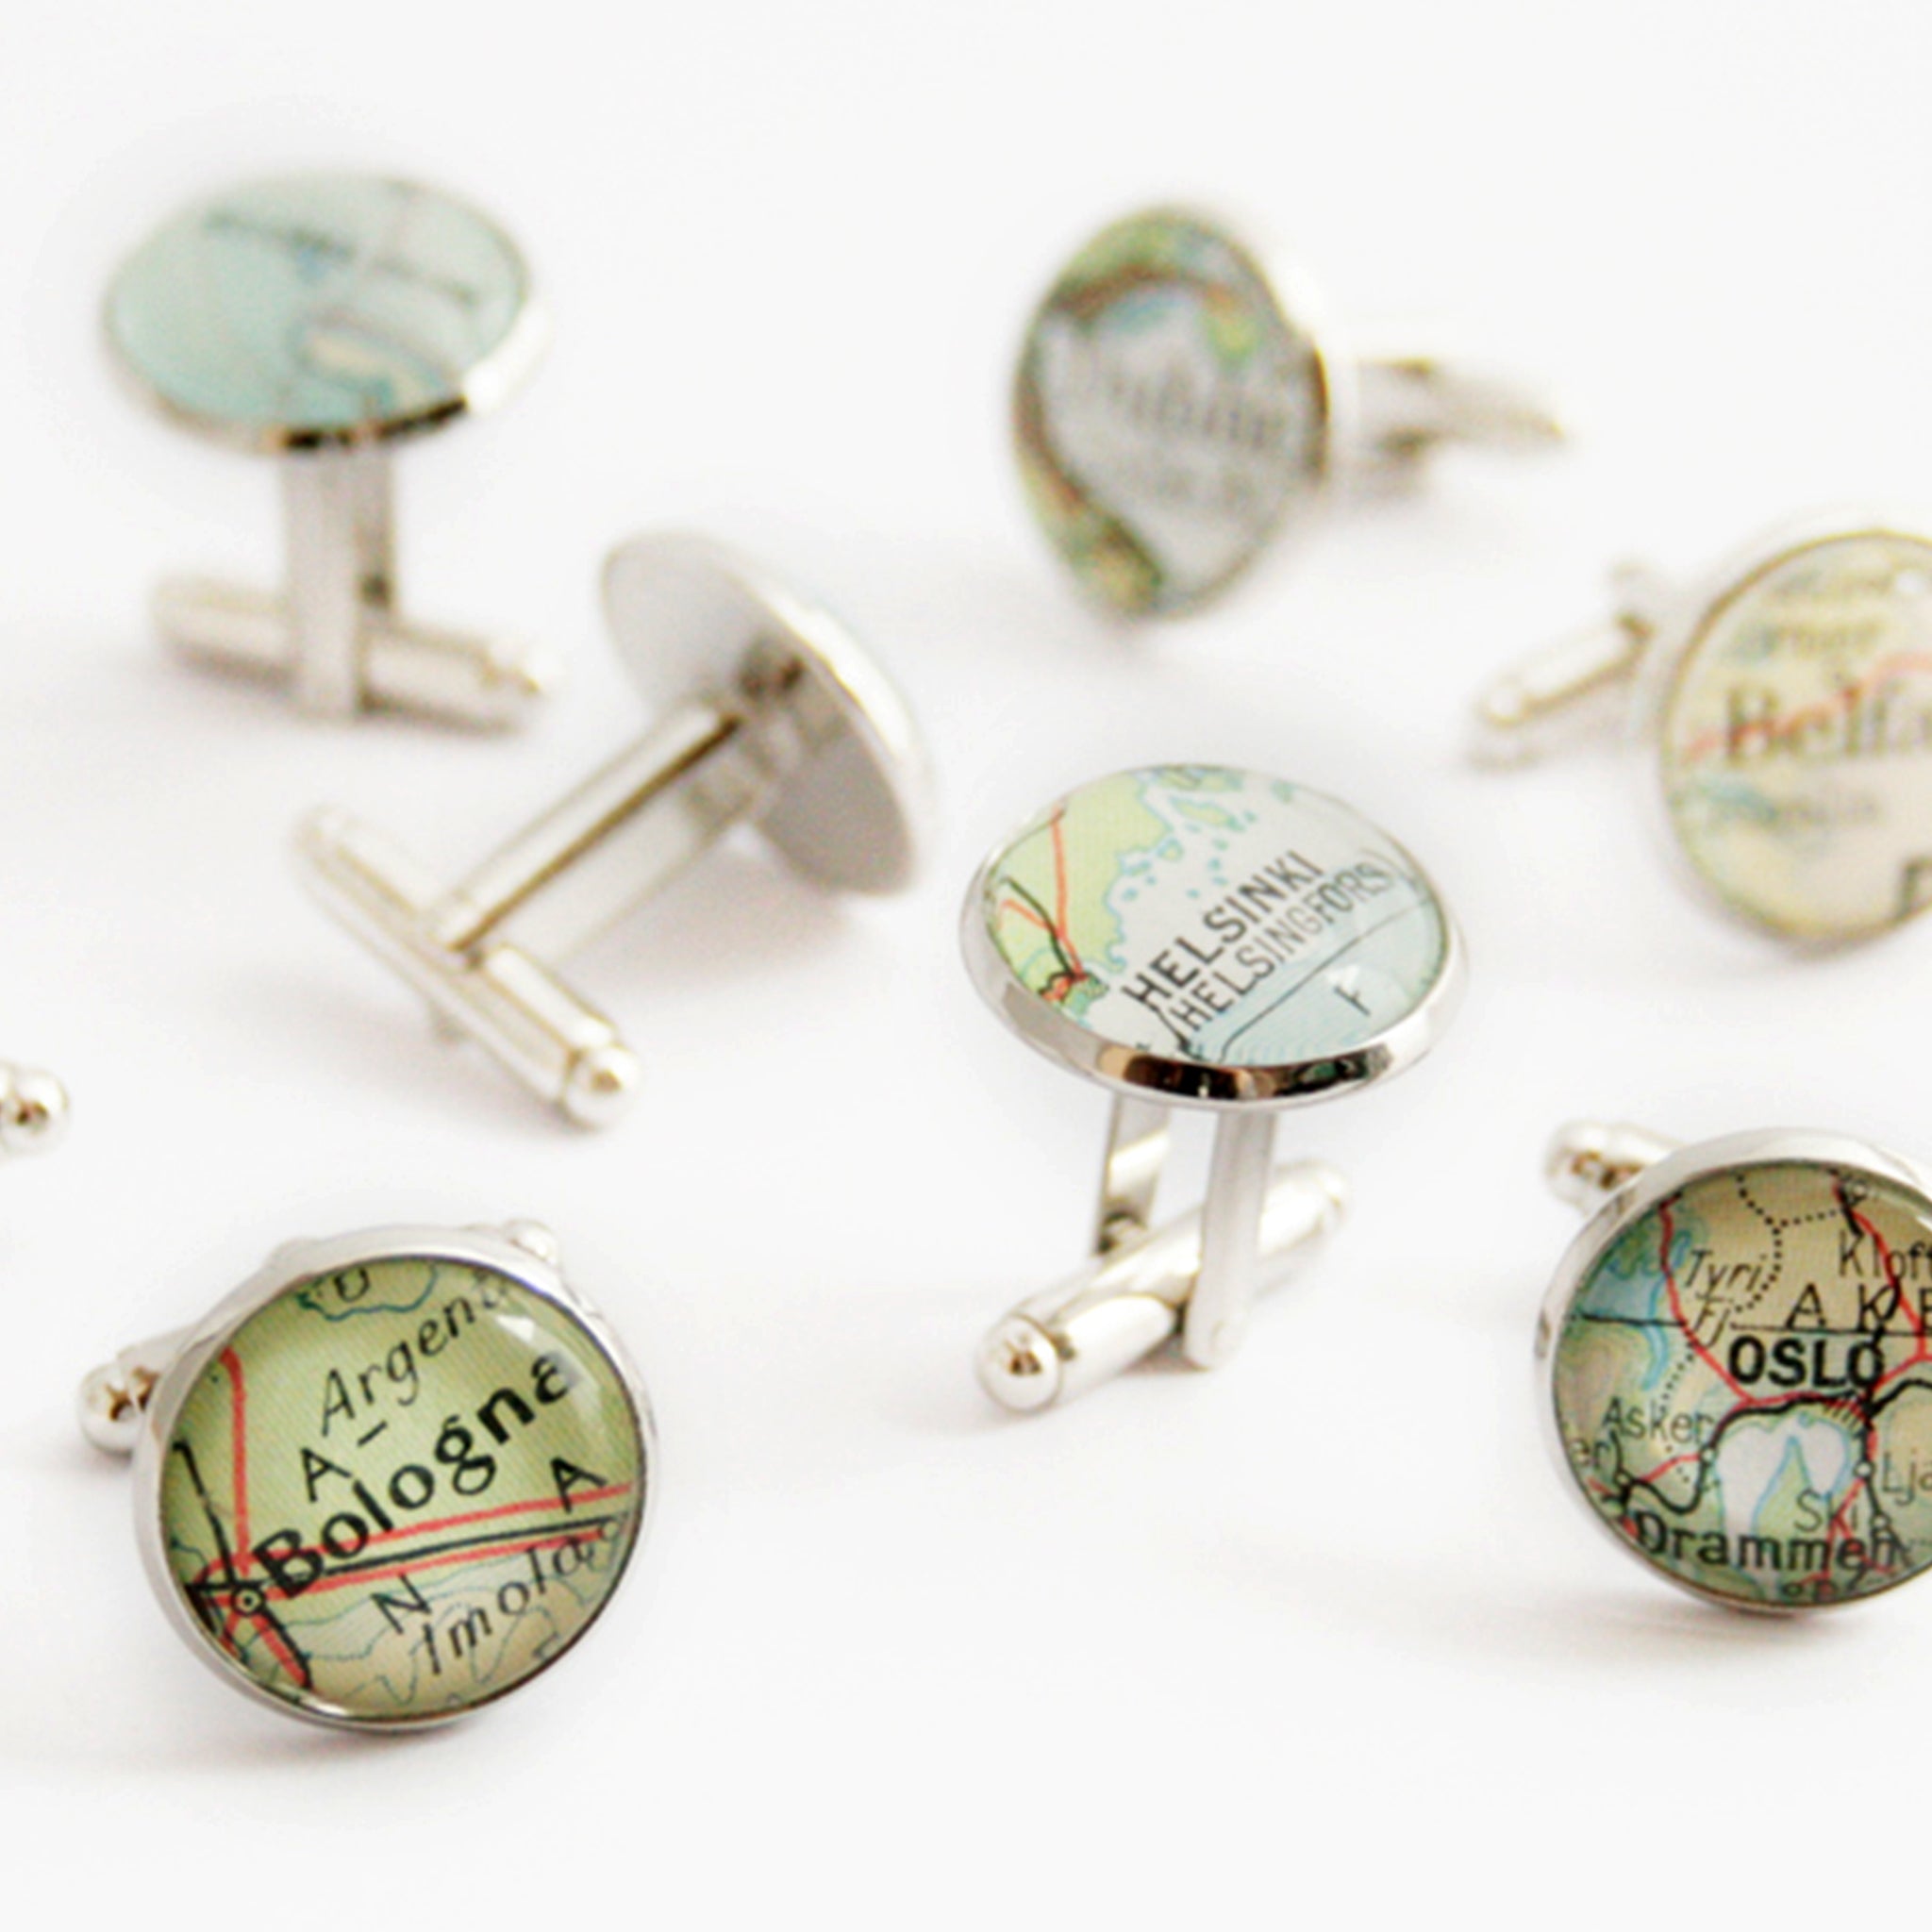 Many sets of Personalised map cufflinks in silver tone featuring custom maps